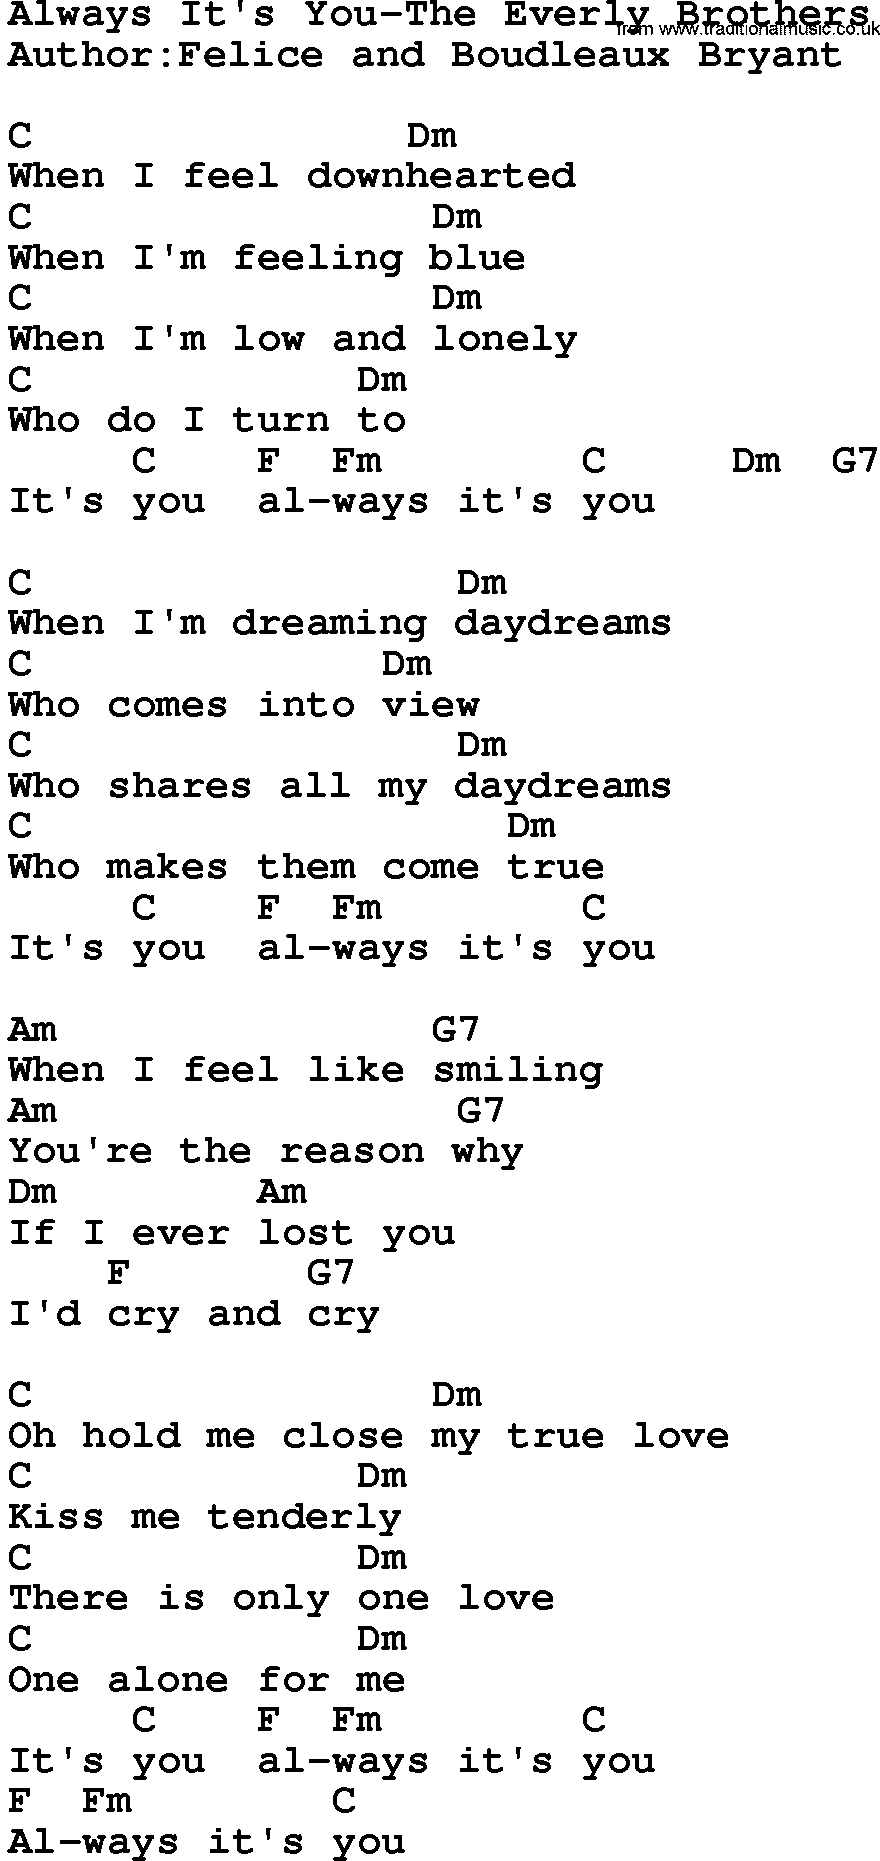 Country music song: Always It's You-The Everly Brothers lyrics and chords